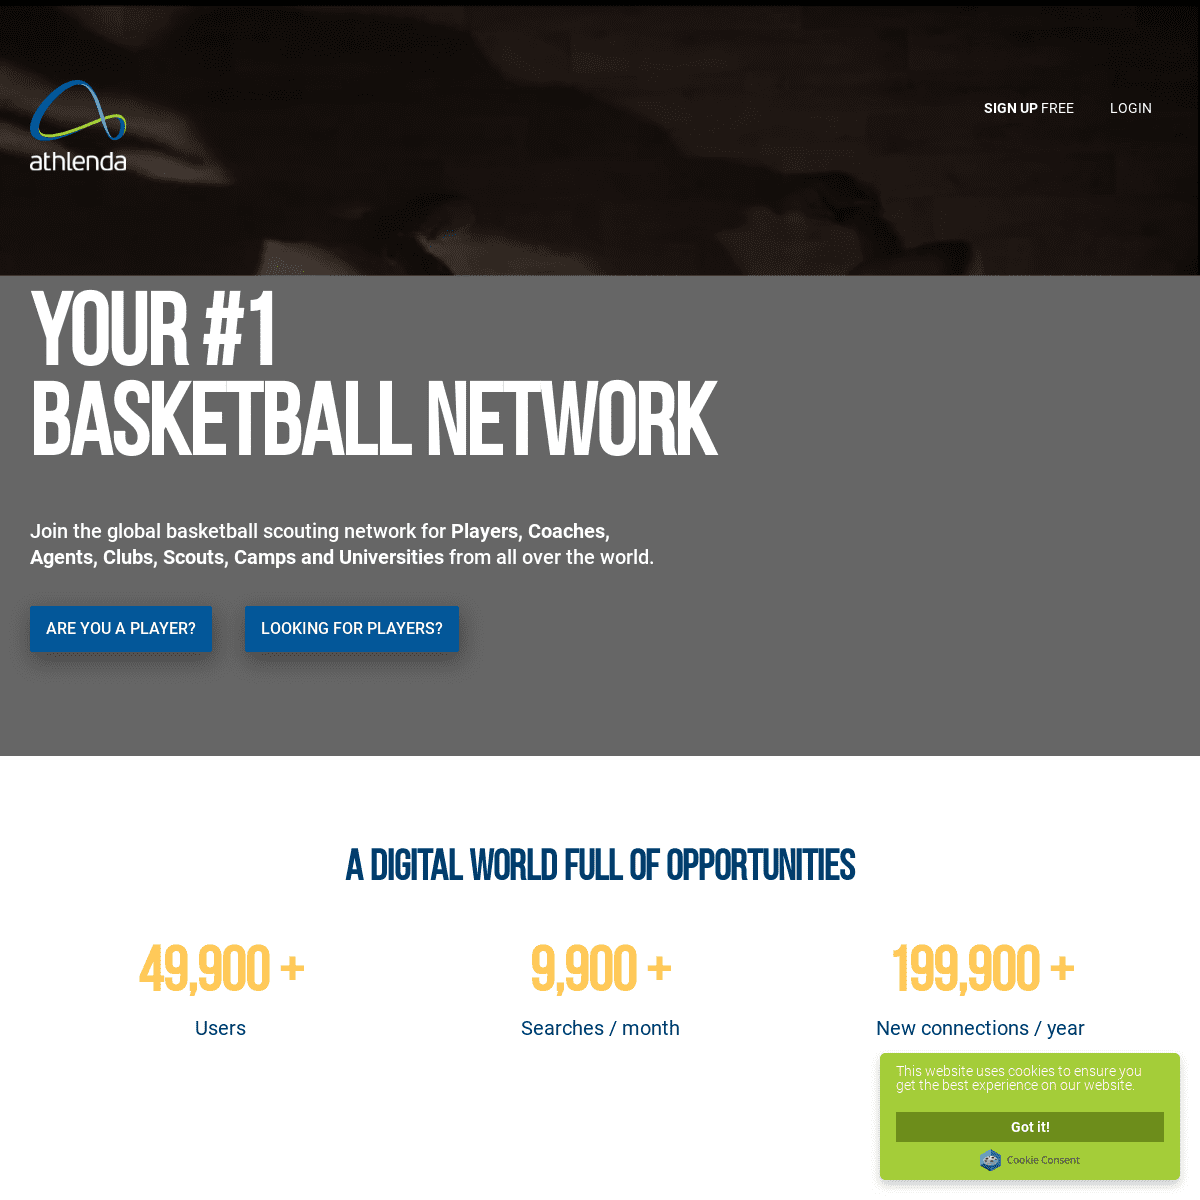 Your #1 Basketball Network for scouting | Athlenda